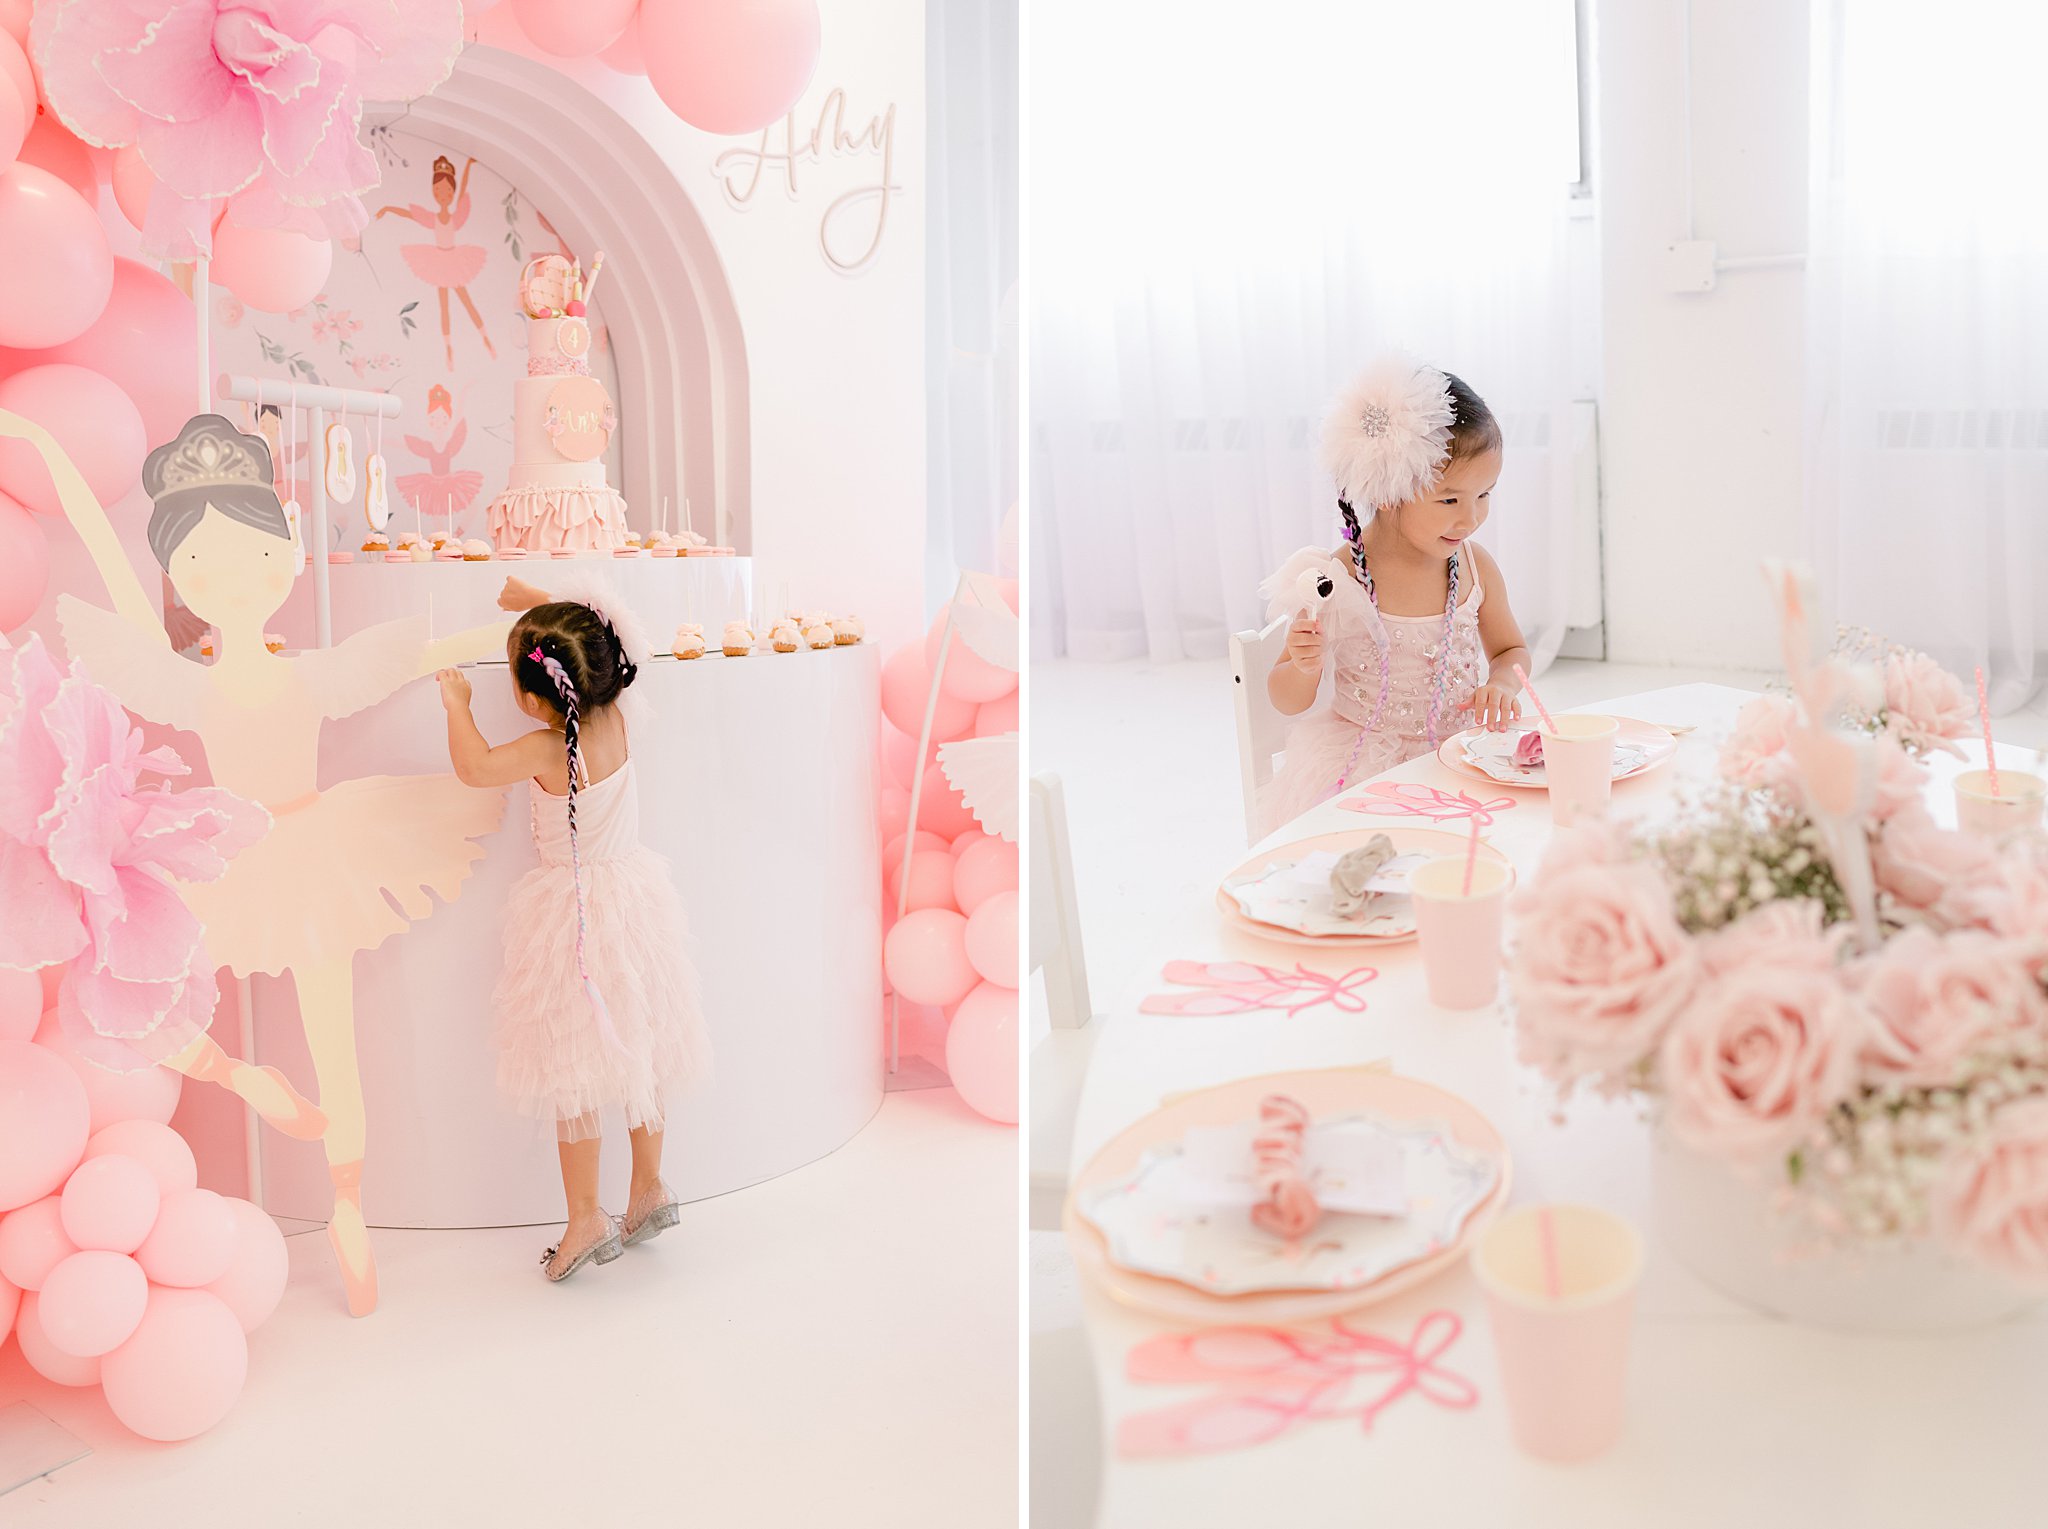 Capturing the essence of a Montreal birthday party, where dreams come to life.